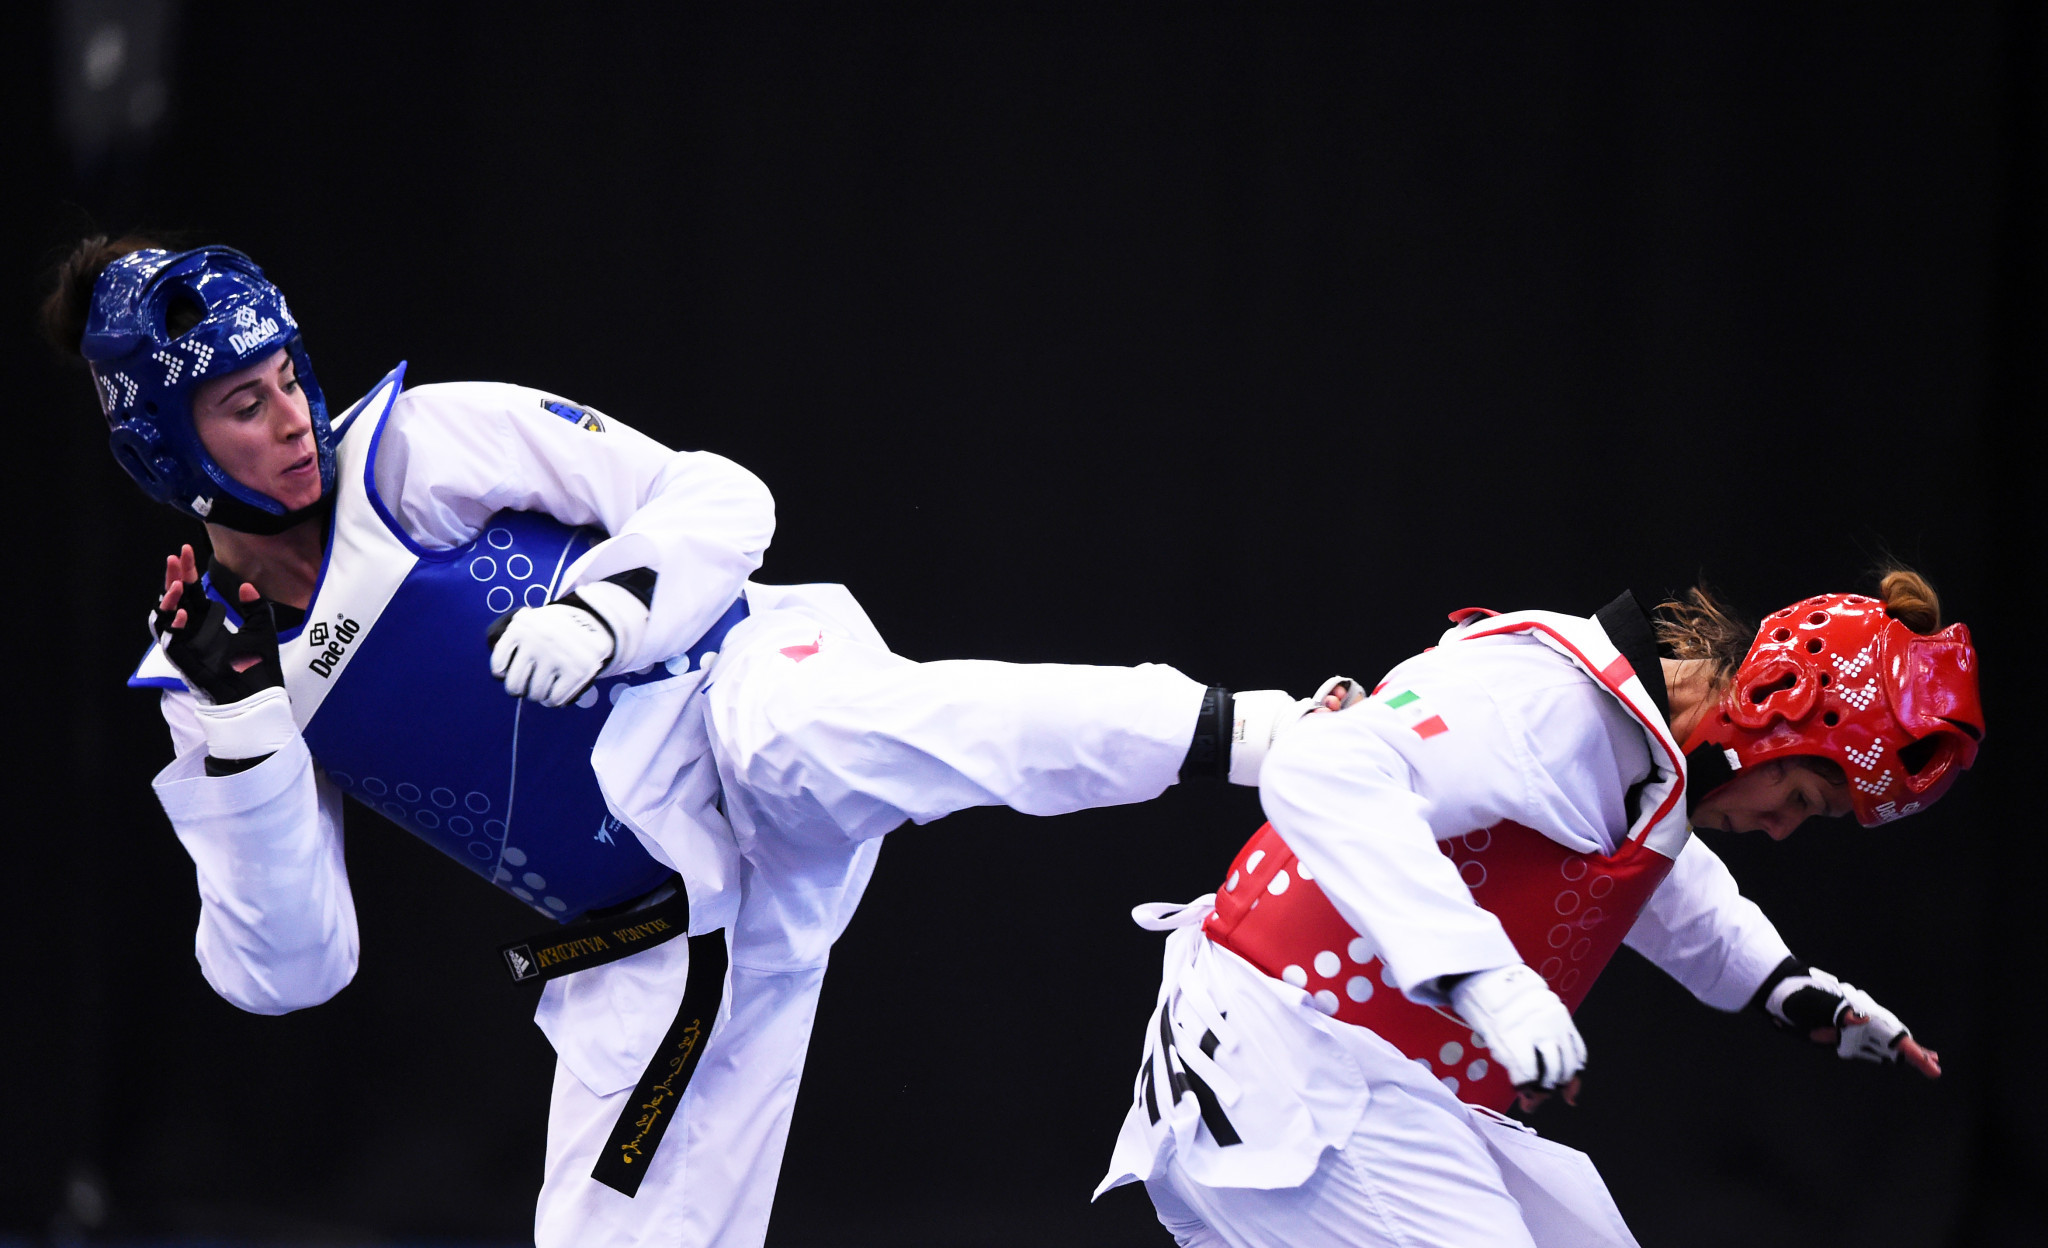 World champion Bianca Walkden claimed the women's over-73 kilograms title at the World Taekwondo President's Cup for Europe region in Antalya ©Getty Images